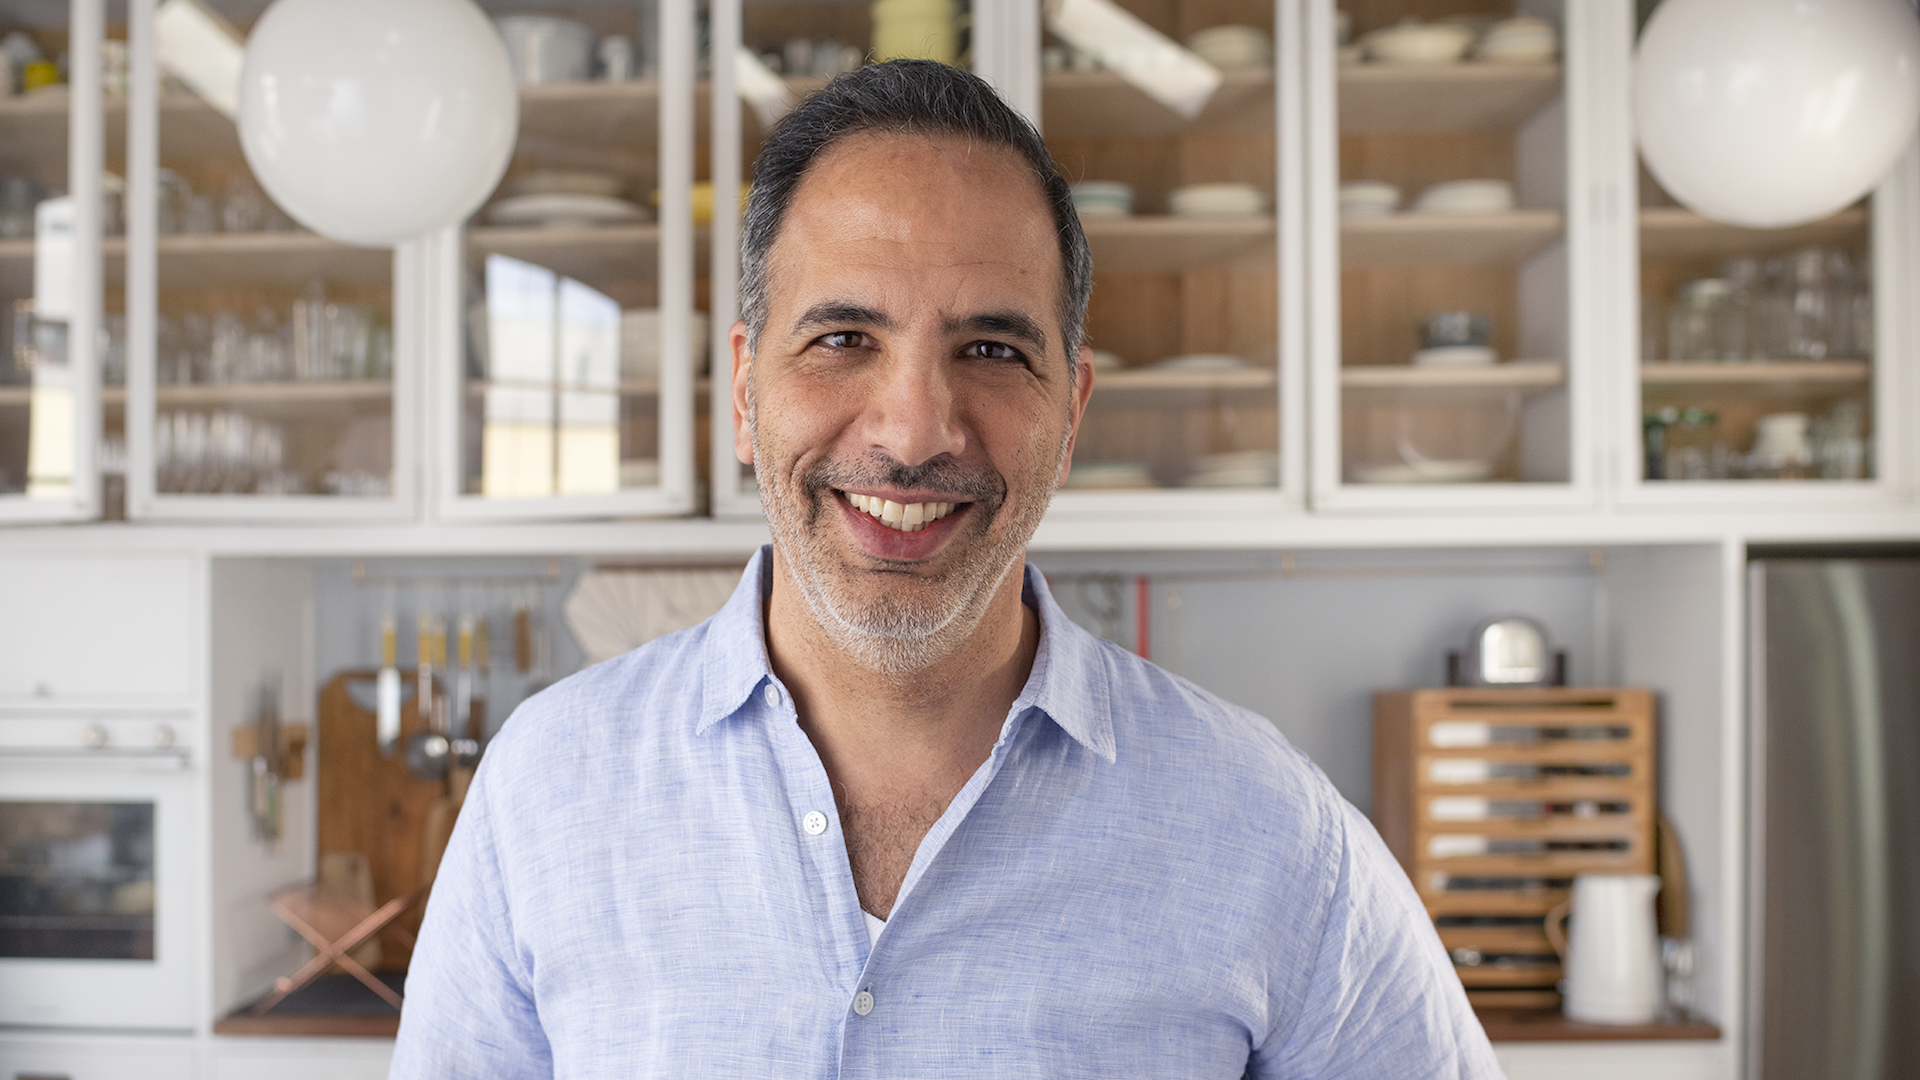 Israeli Chef Yotam Ottolenghi Is Finally Bringing His Latest Speaking Tour Down Under in 2023